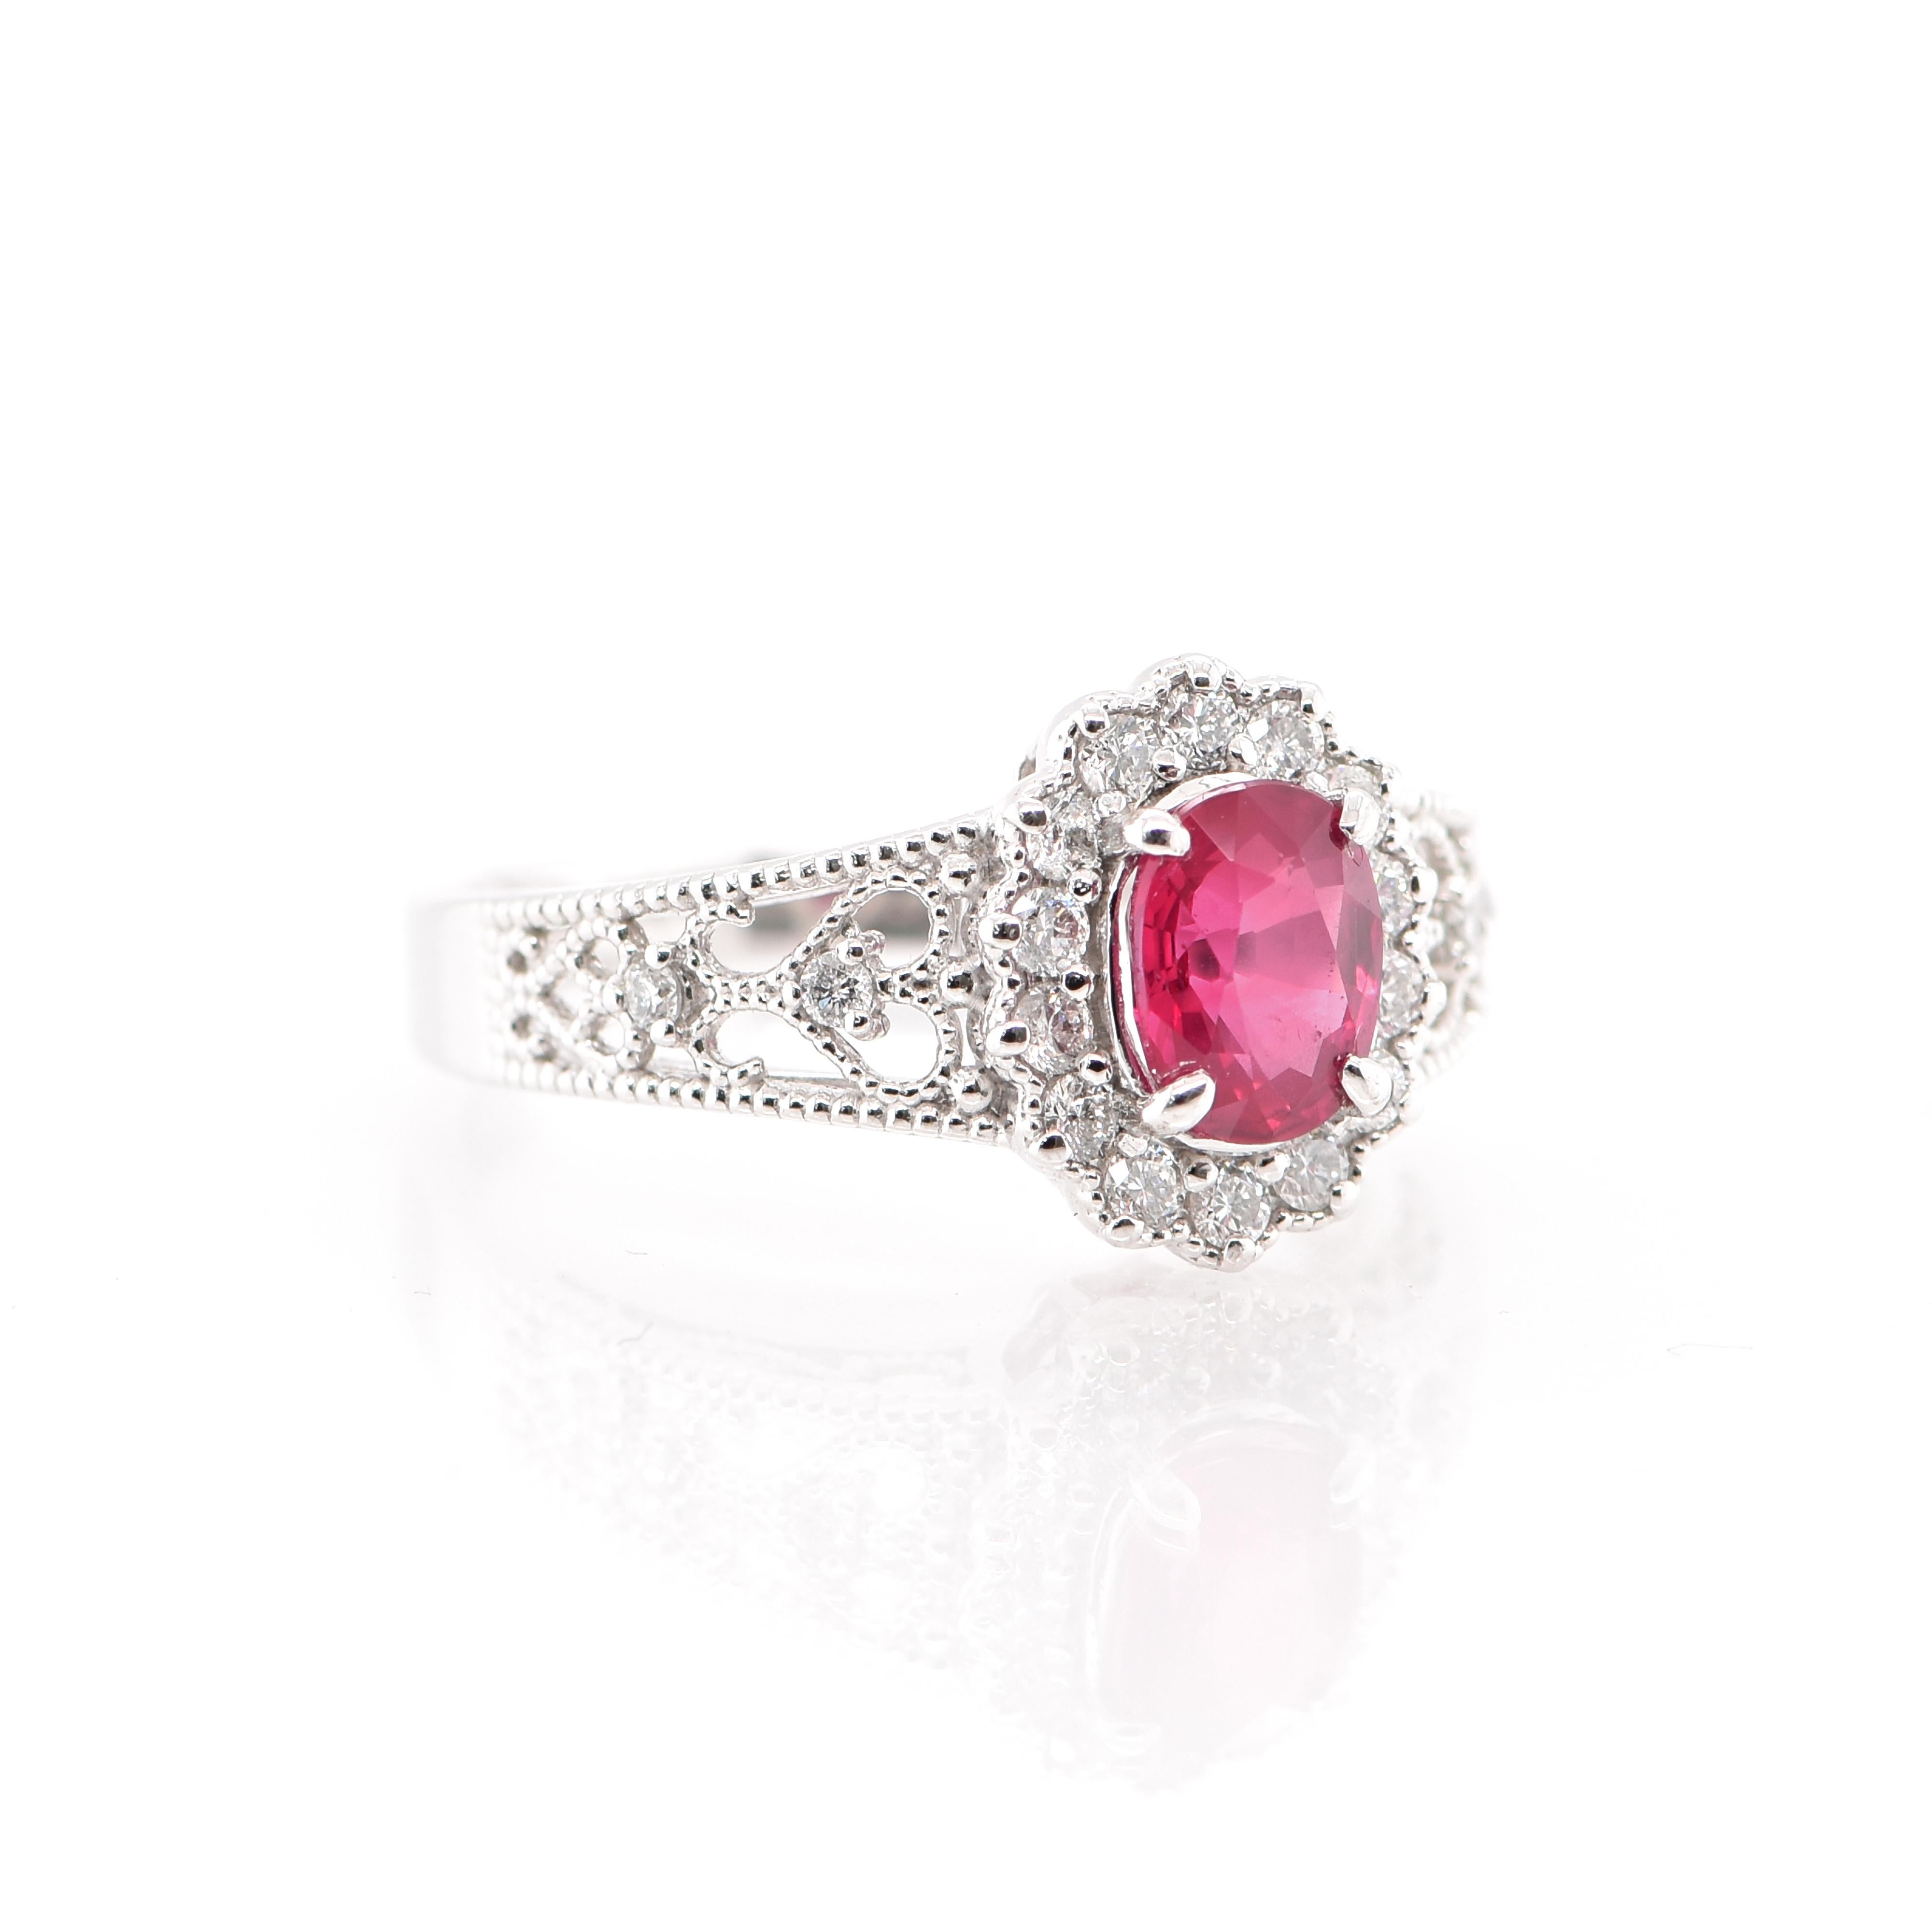 Modern 1.108 Carat Natural Untreated 'No Heat' Ruby and Diamond Ring Set in Platinum